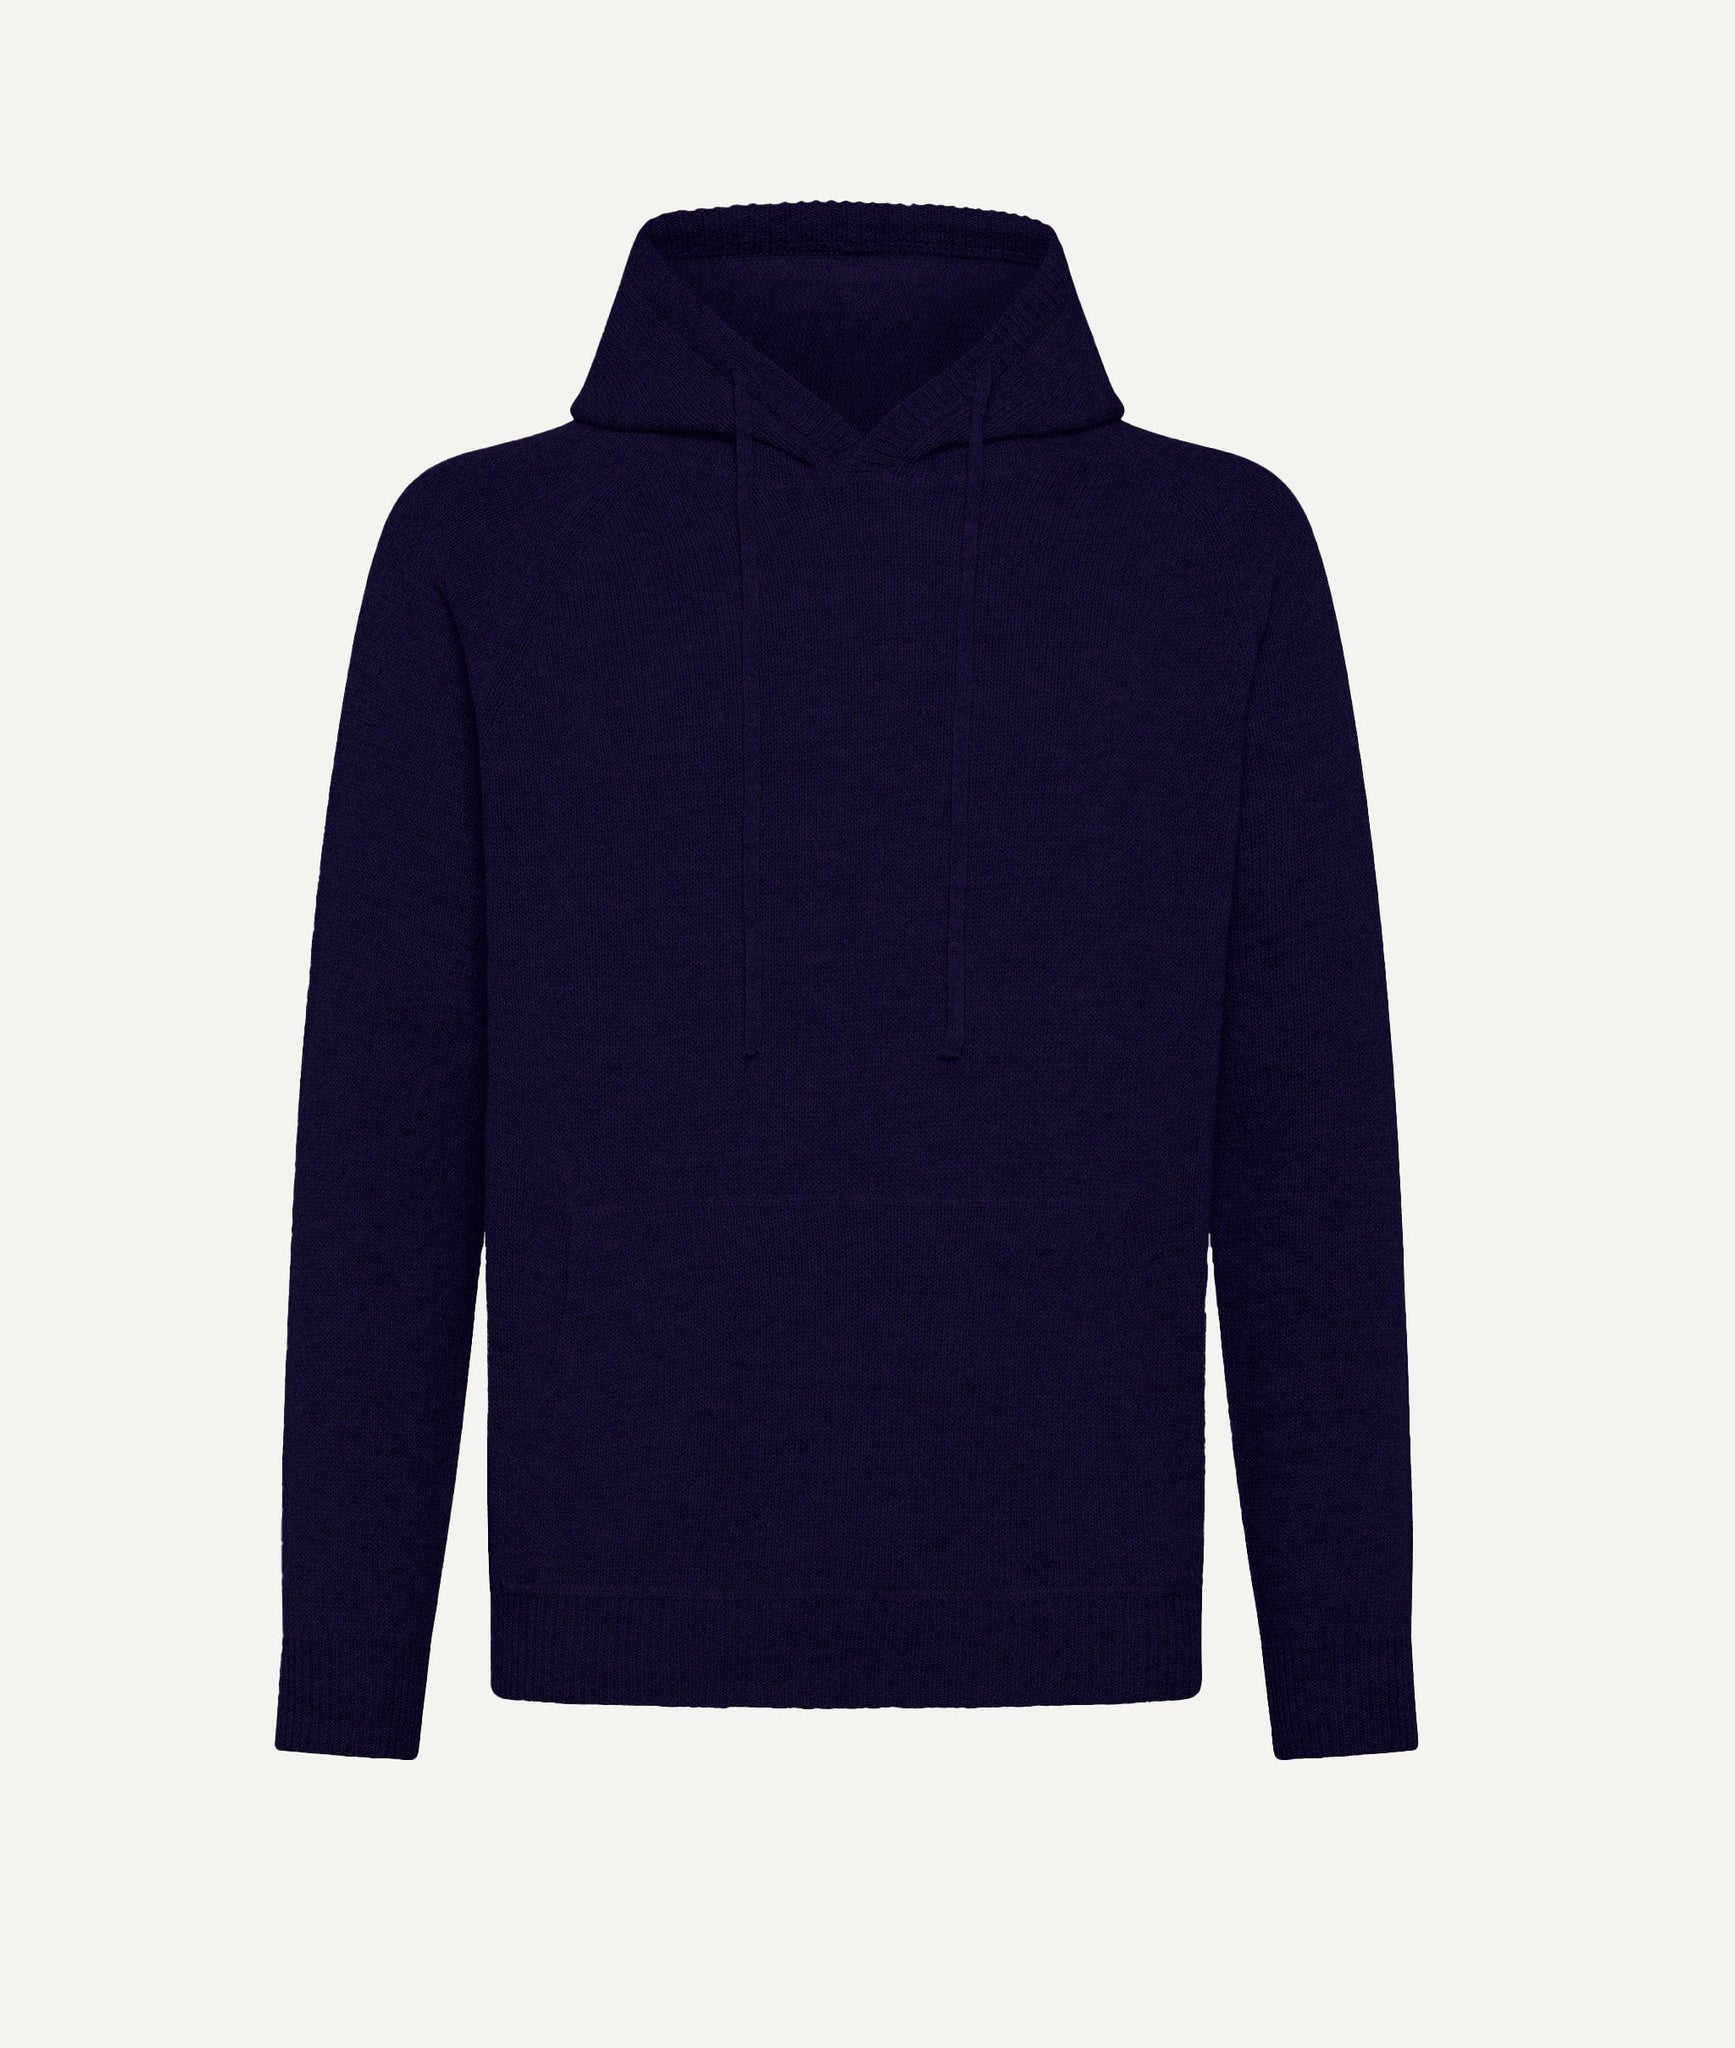 Lanificio Pubblico - Sweater with Hoodie in Wool